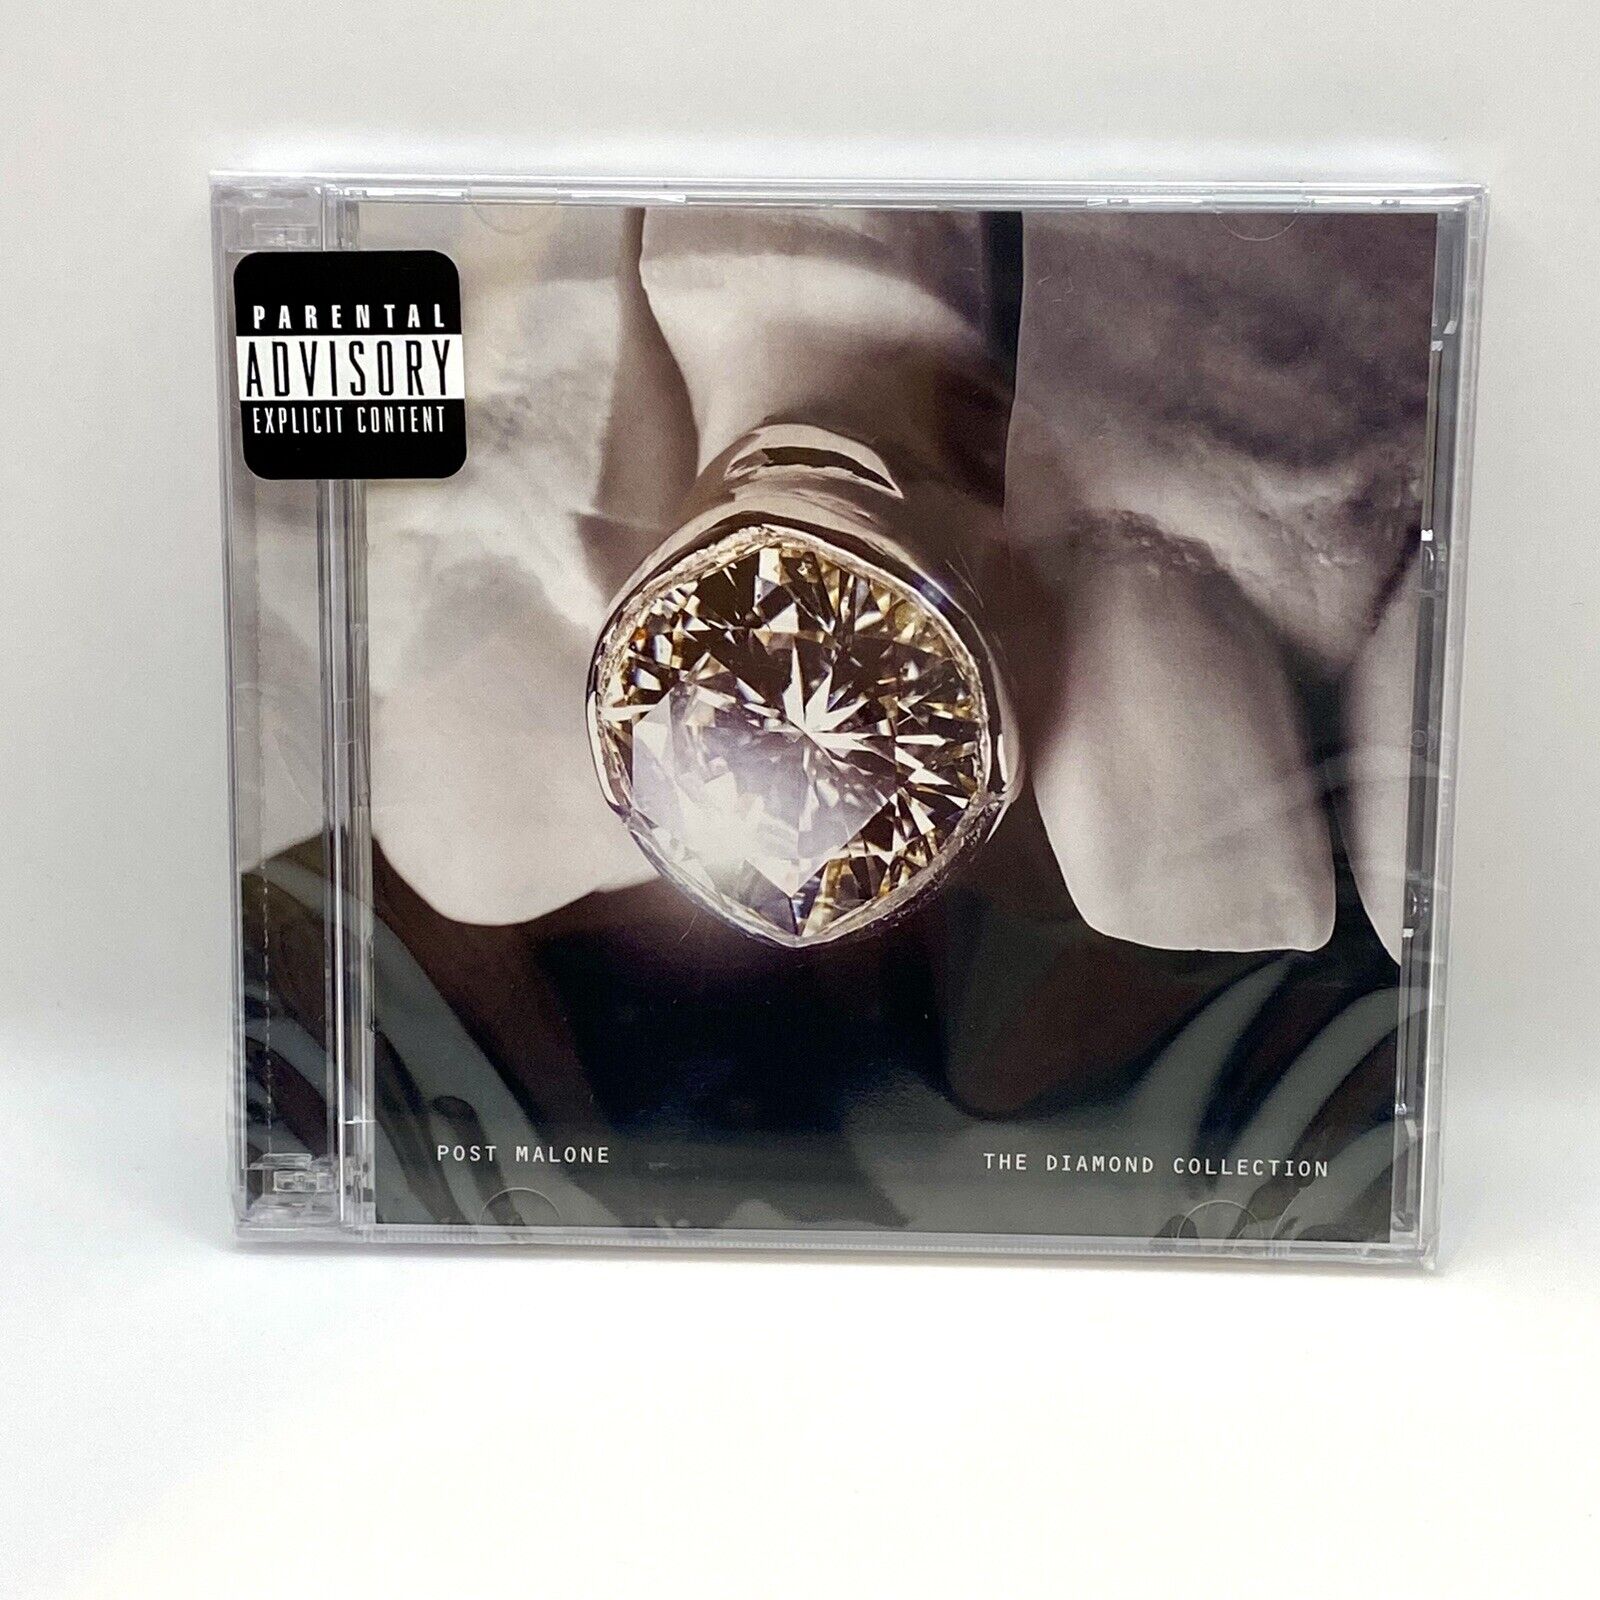 POST MALONE - The Diamond Collection [2 CD] NEW, Explicit